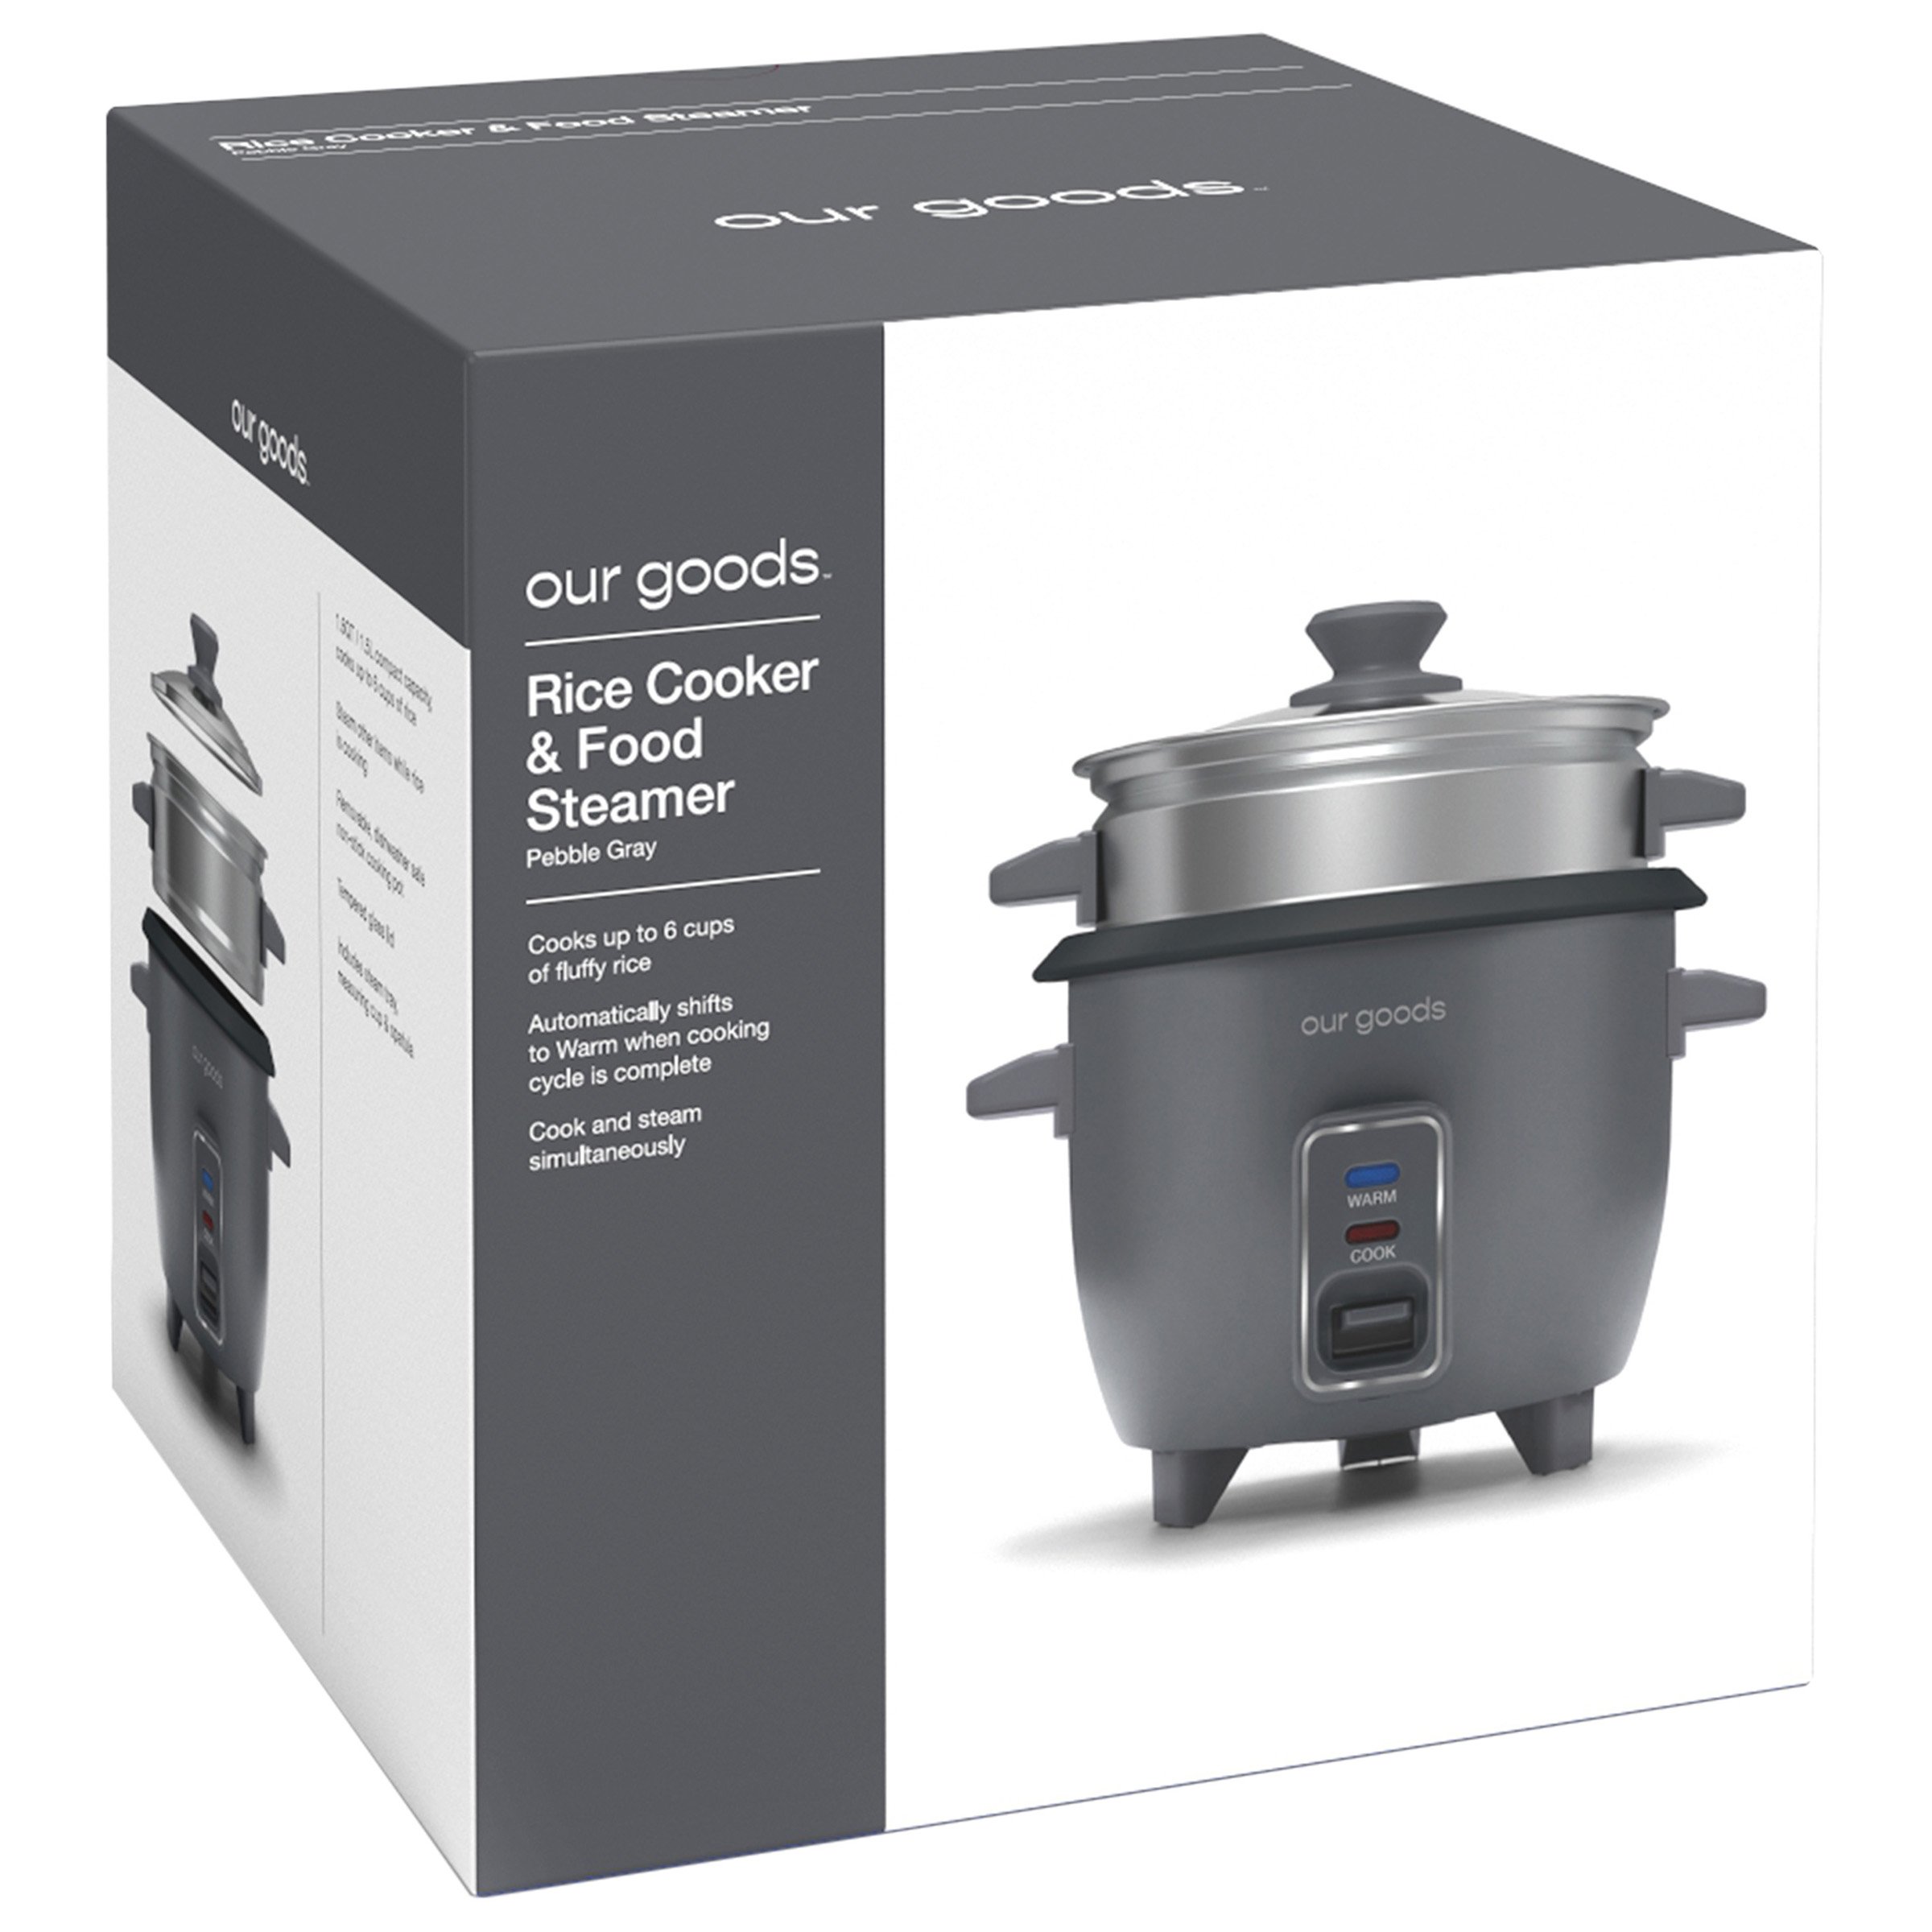 National Brand Rice Cookers & Food Steamers